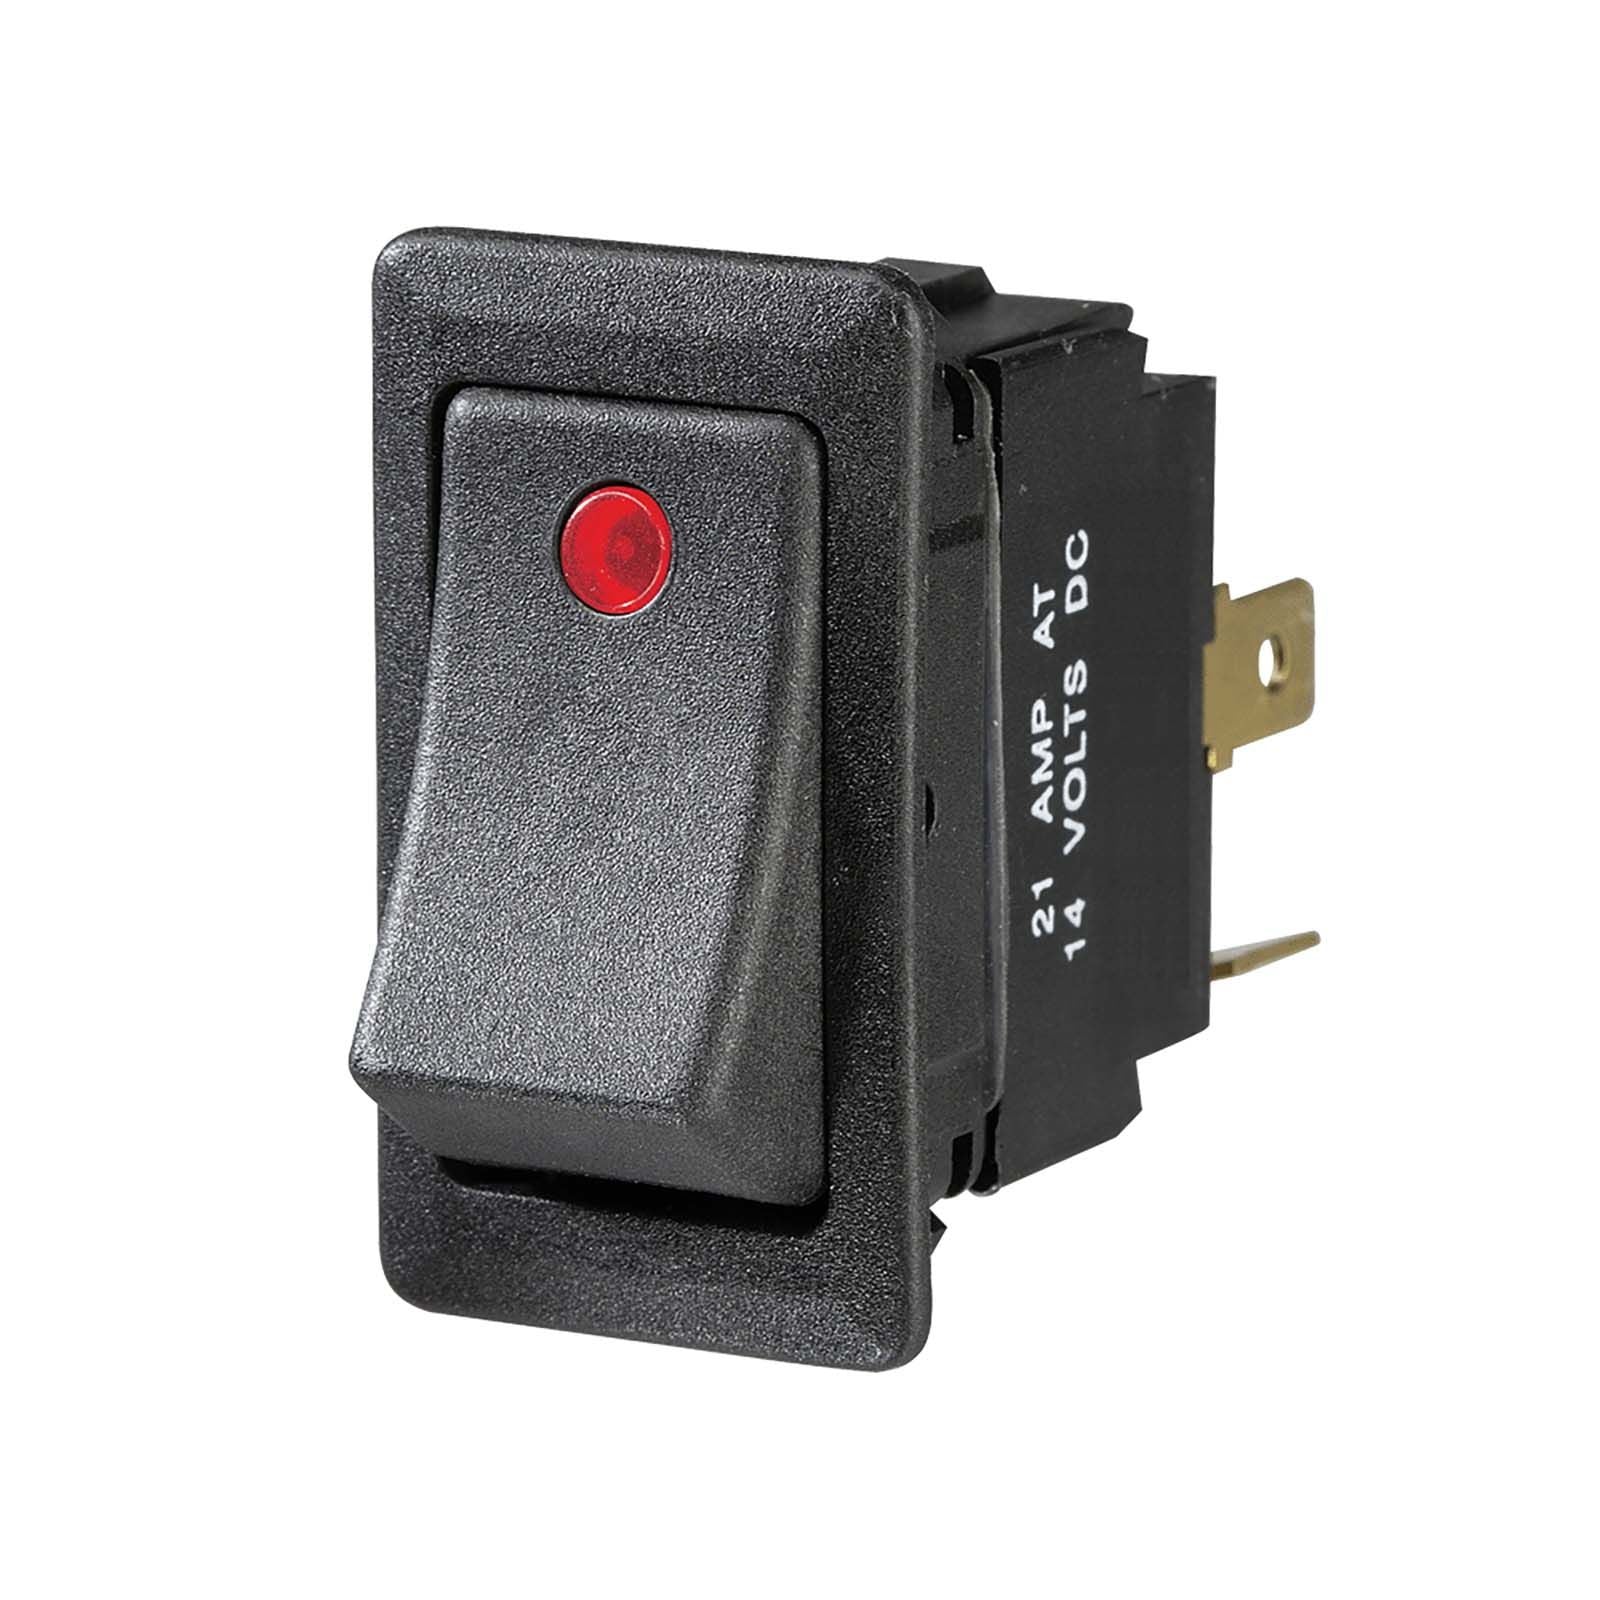 Illuminated Off/On Heavy-Duty Rocker Switch (Red) BLISTER PACK OF 1